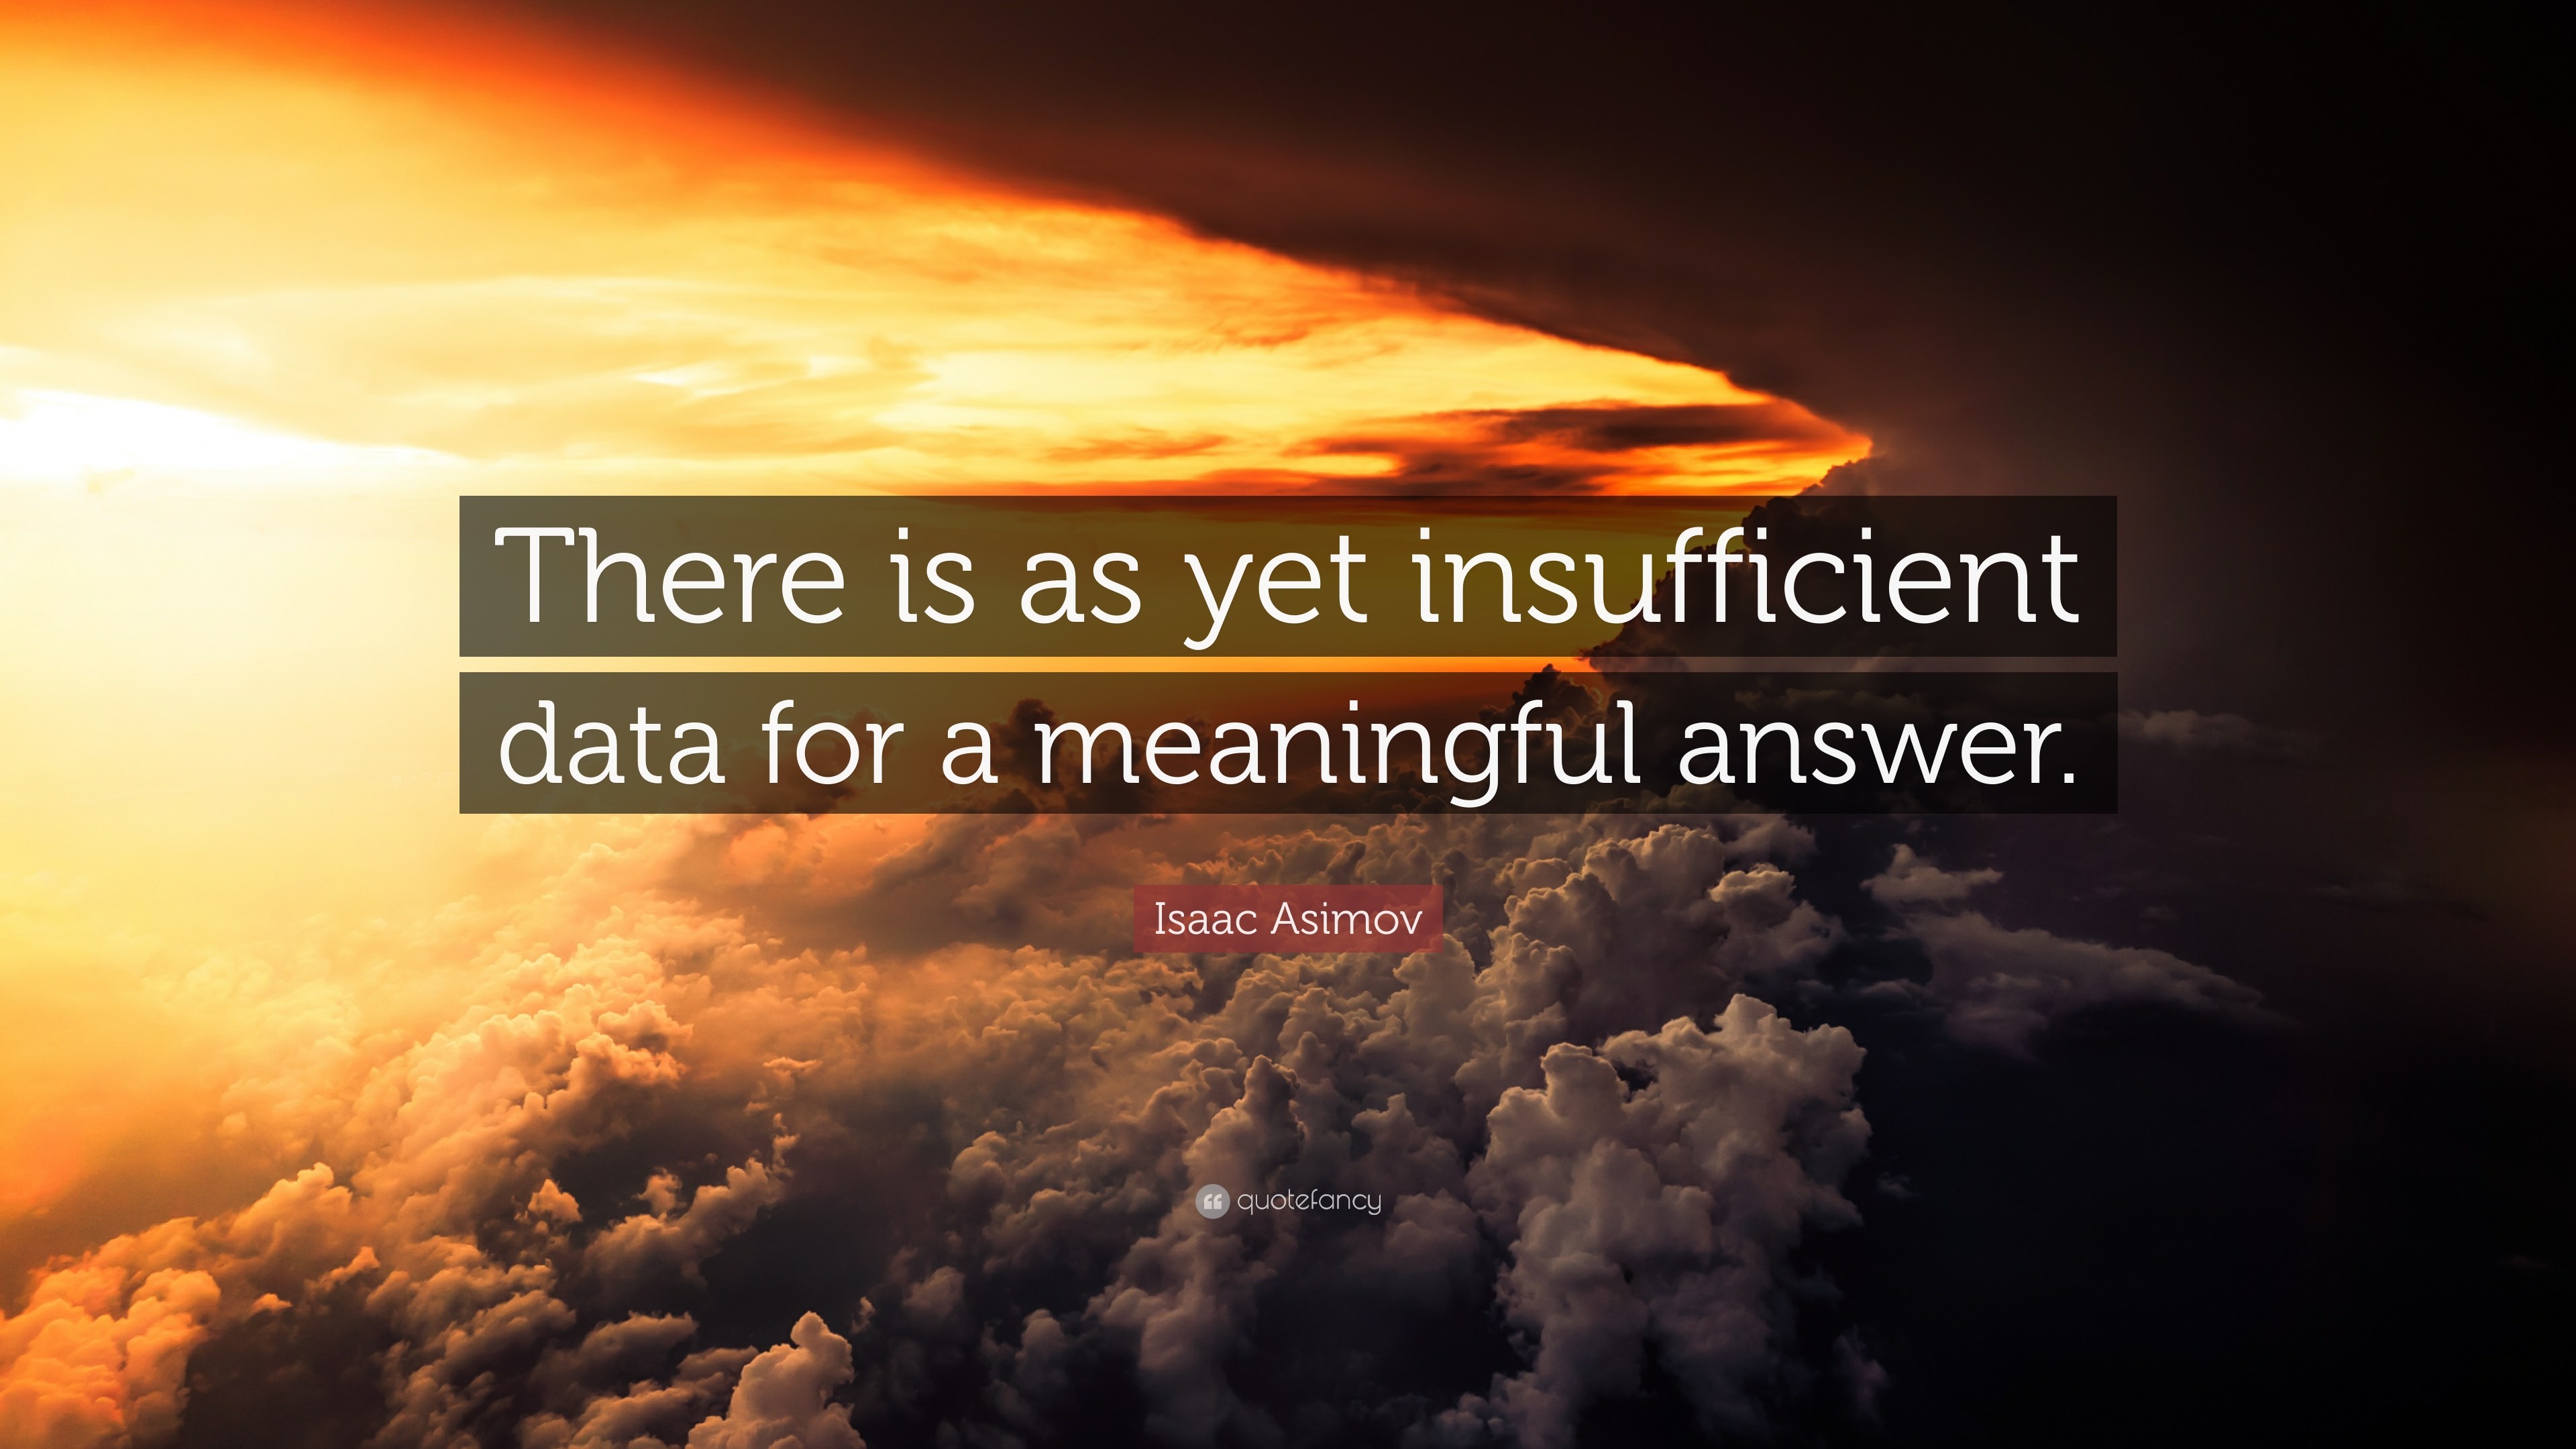 3840x2160 Isaac Asimov Quote: “There is as yet insufficient data for a meaningful  answer.